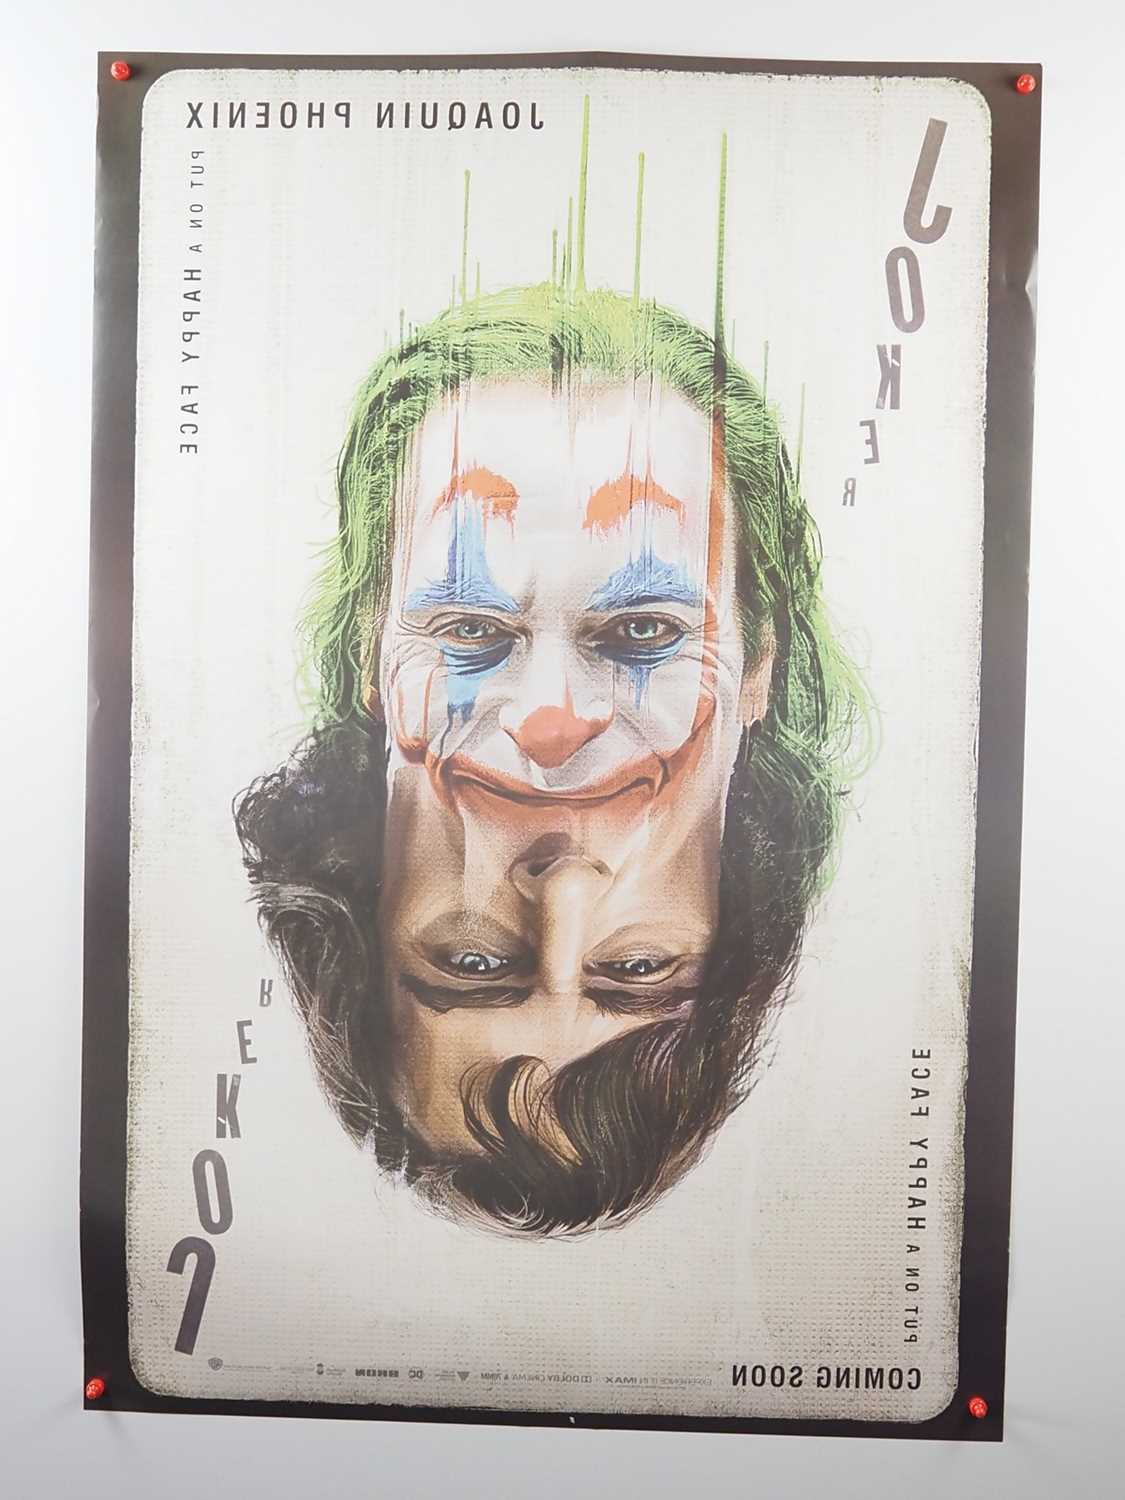 JOKER (2019) - 'Playing Card' style Thai one sheet movie poster of Joaquin Phoenix in the title role - Bild 6 aus 6